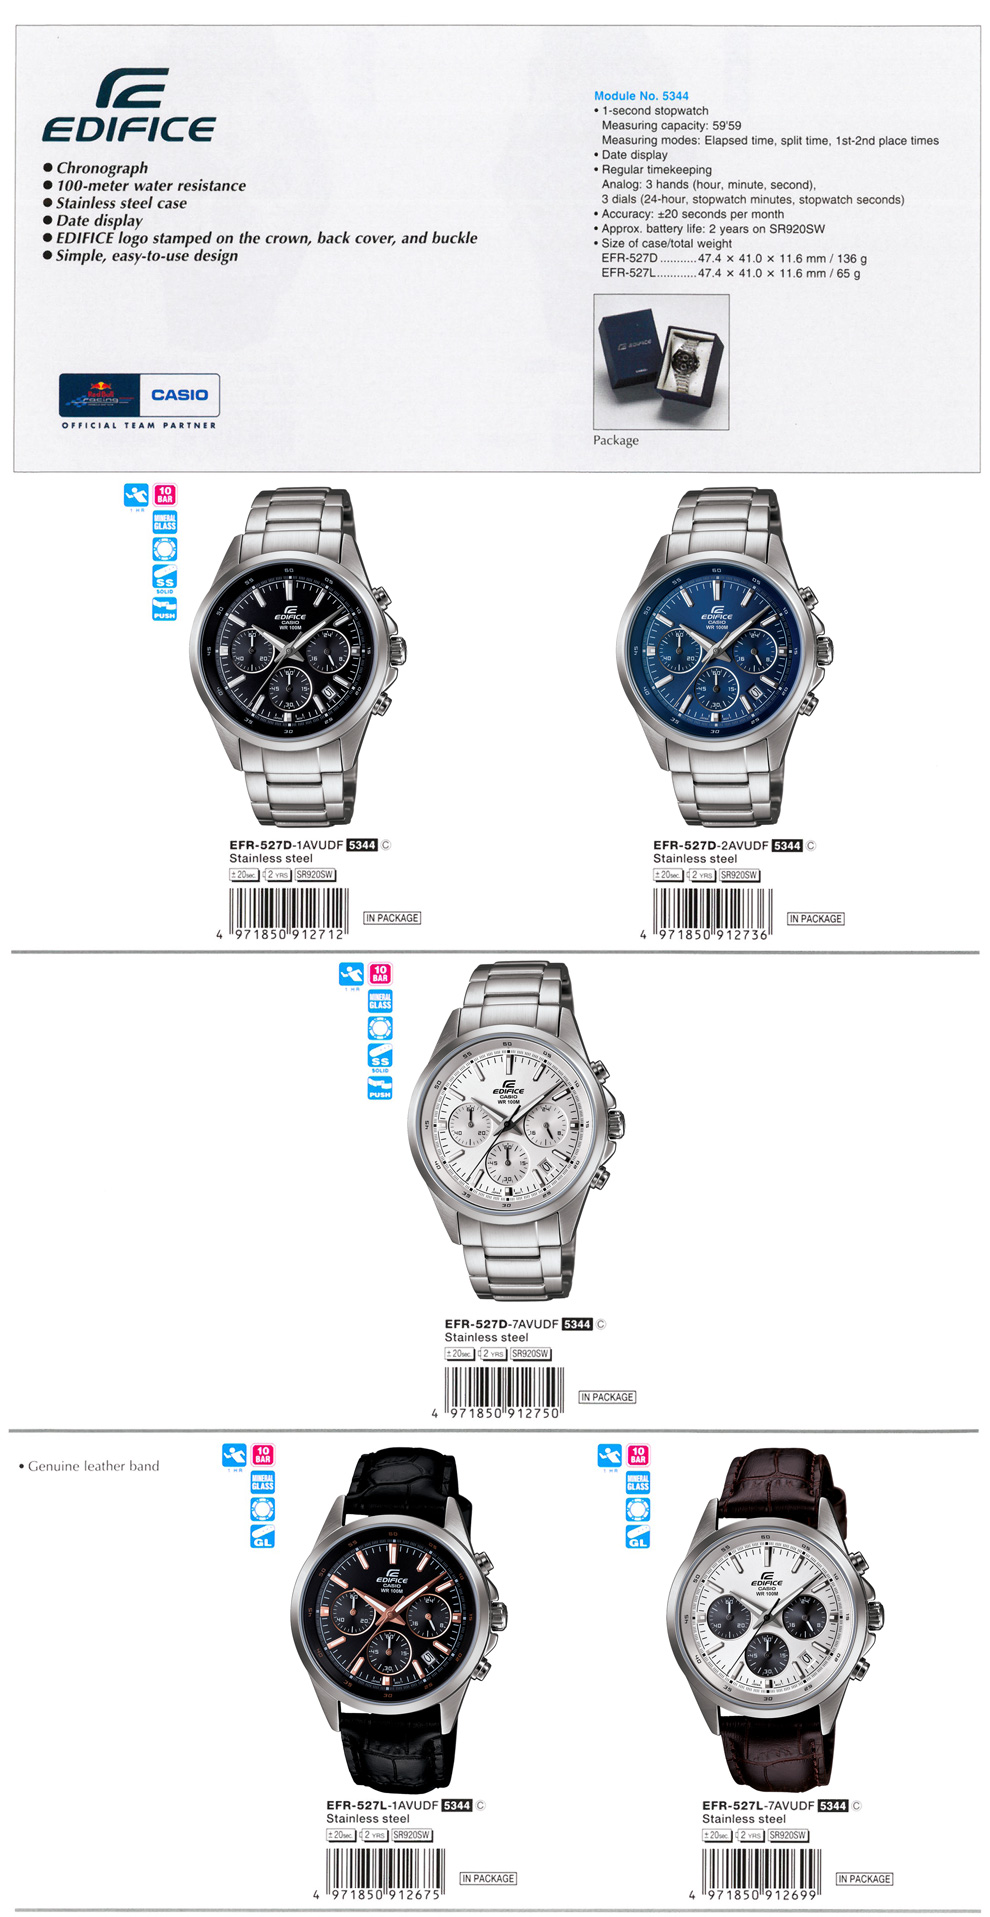 Watch, Edifice, Chronograph, water resistance, stainless steel case, easy-to-use design, EFR=527D-1AV, EFR=527D-2AV, EFR-527D-7AV, EFR-527L-AV, EFR-527-7AV